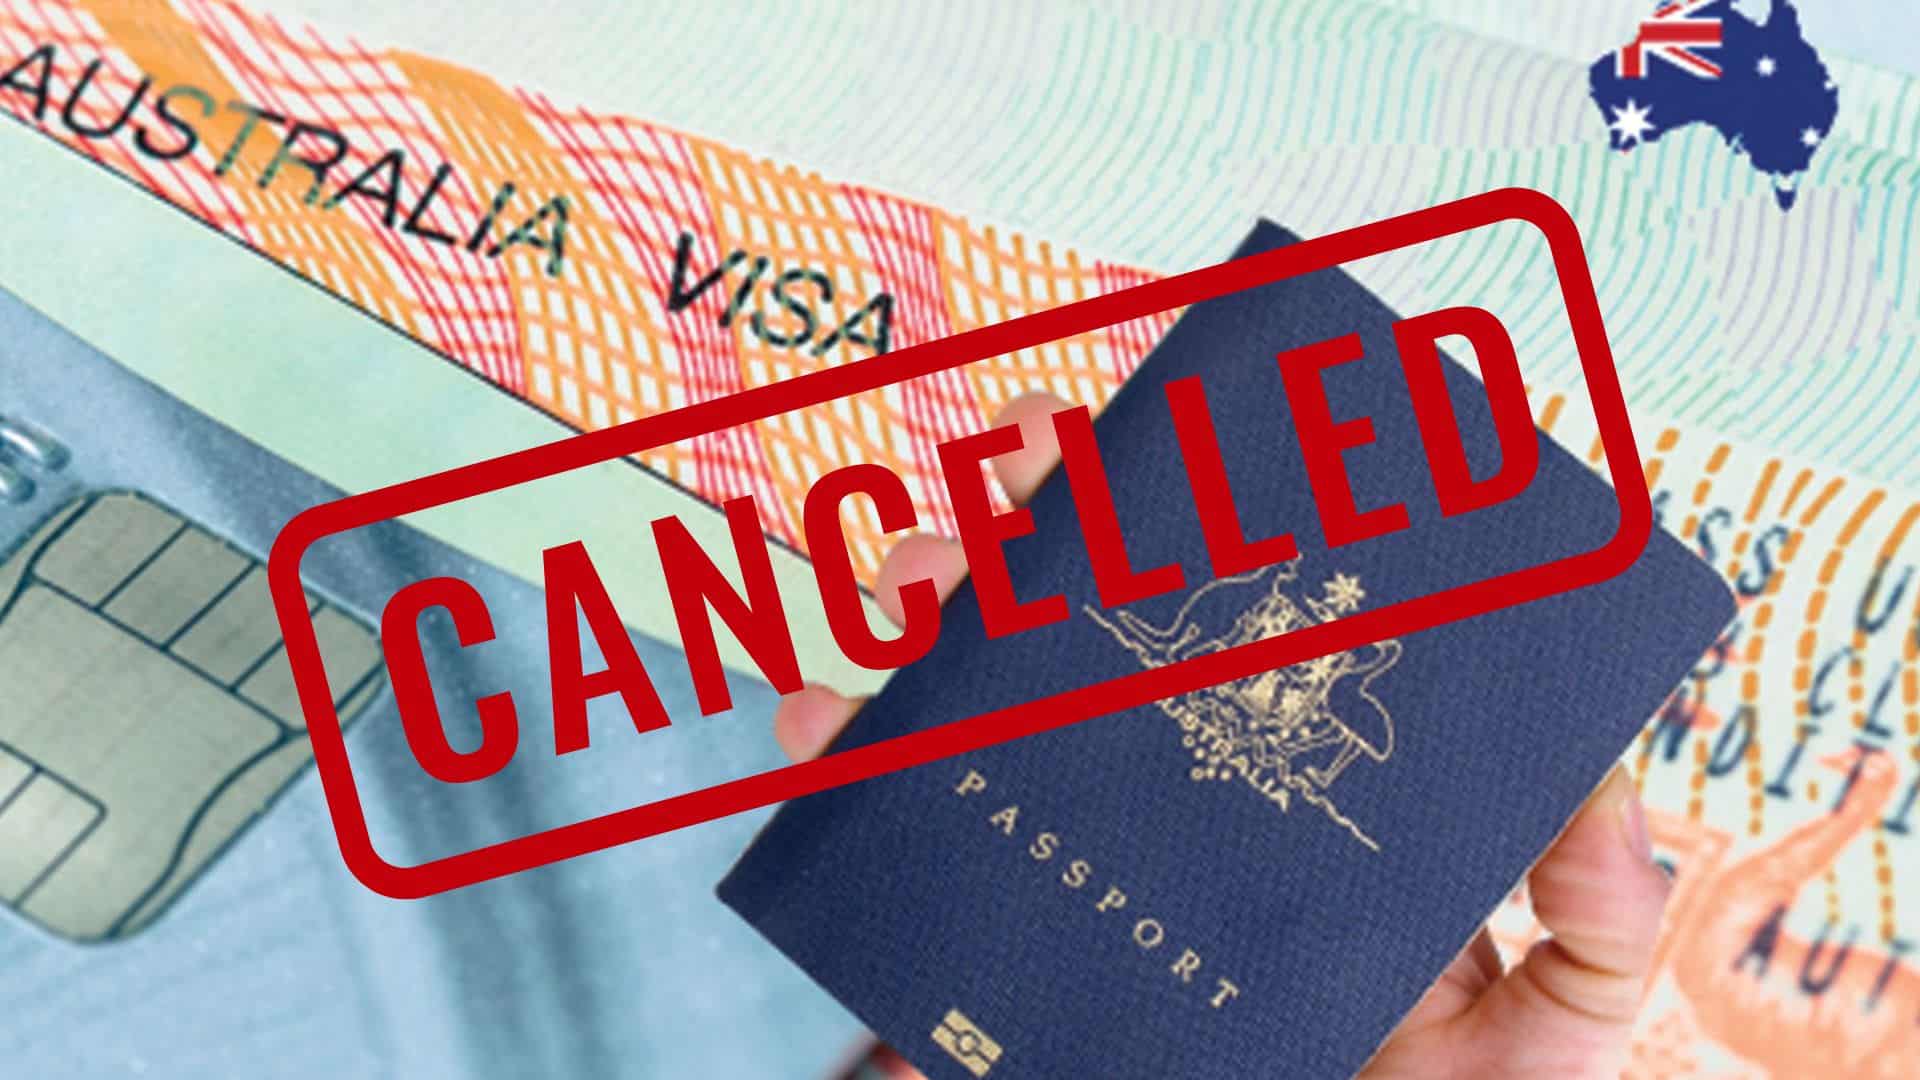 Sydney Man Forced to Leave Family due to Unregistered Migration Agent